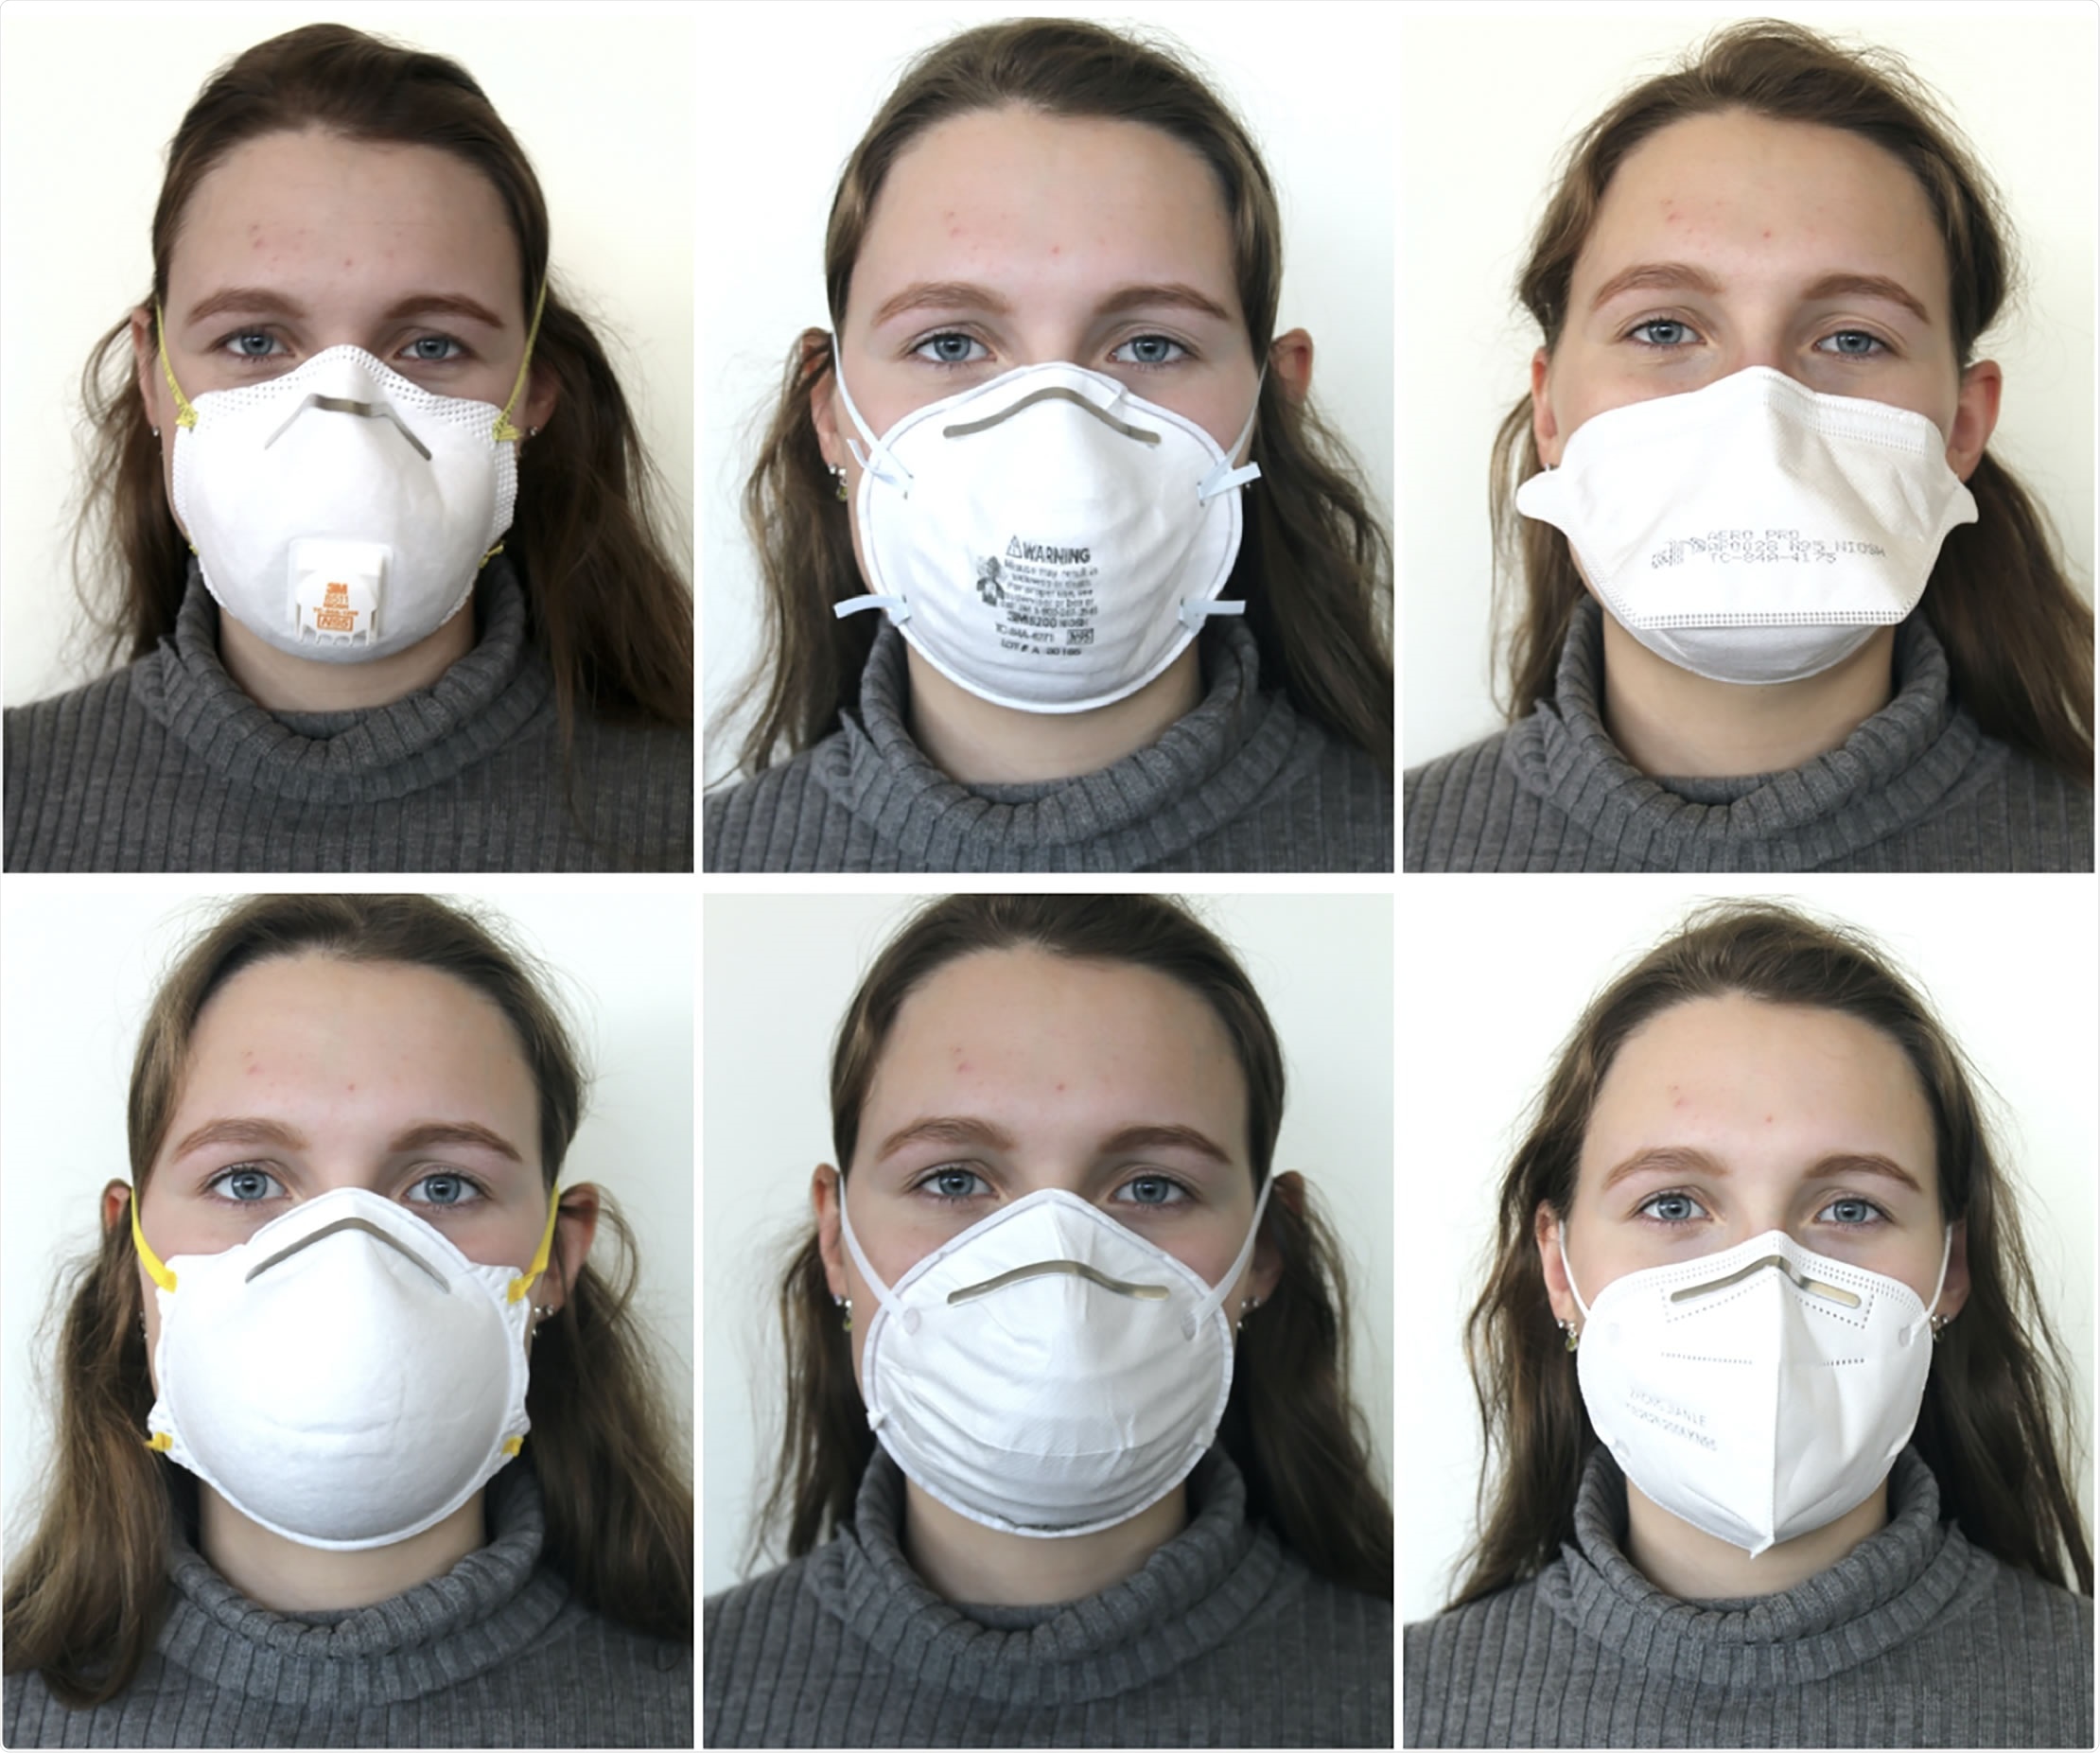 N95 and KN95 respirators tested.  Top row, from left to right: 3M 8511, 3M 8200, Aero Pro AP0028. Bottom row, from left to right: Makrite 9500, Xiantao Zong ZYB-11, Zhong Jian Le KN95.  https://doi.org/10.1371/journal.pone.0245688.g002